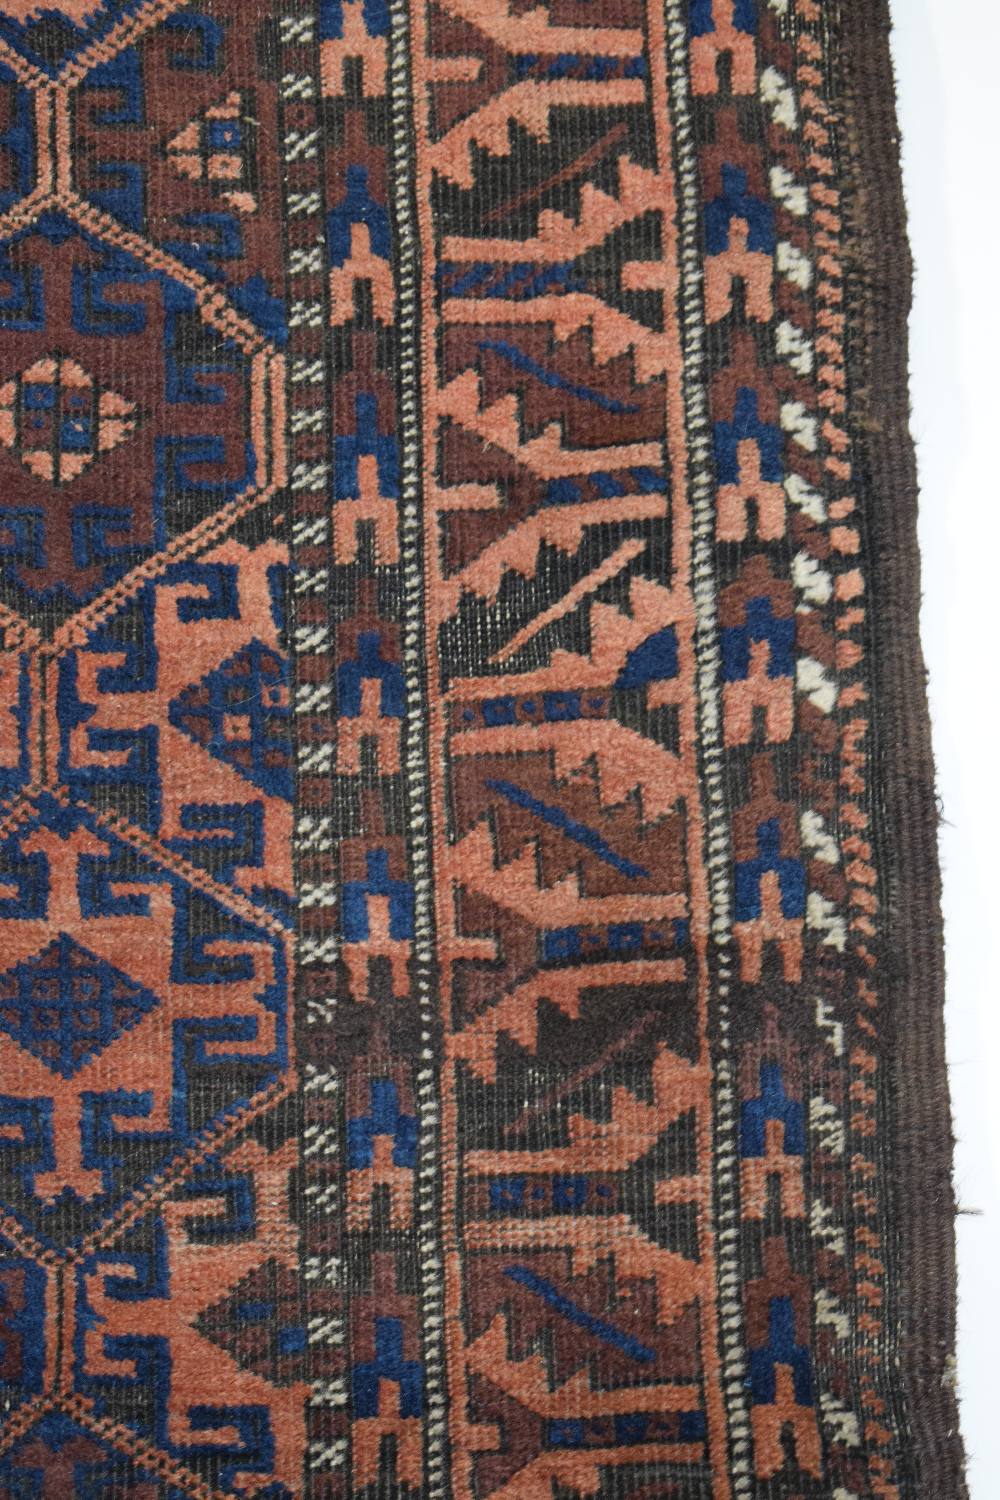 Baluchi rug, Khorasan, north east Persia, early 20th century, 4ft. 10in. x 2ft. 10in. 1.47m. x 0. - Image 3 of 10